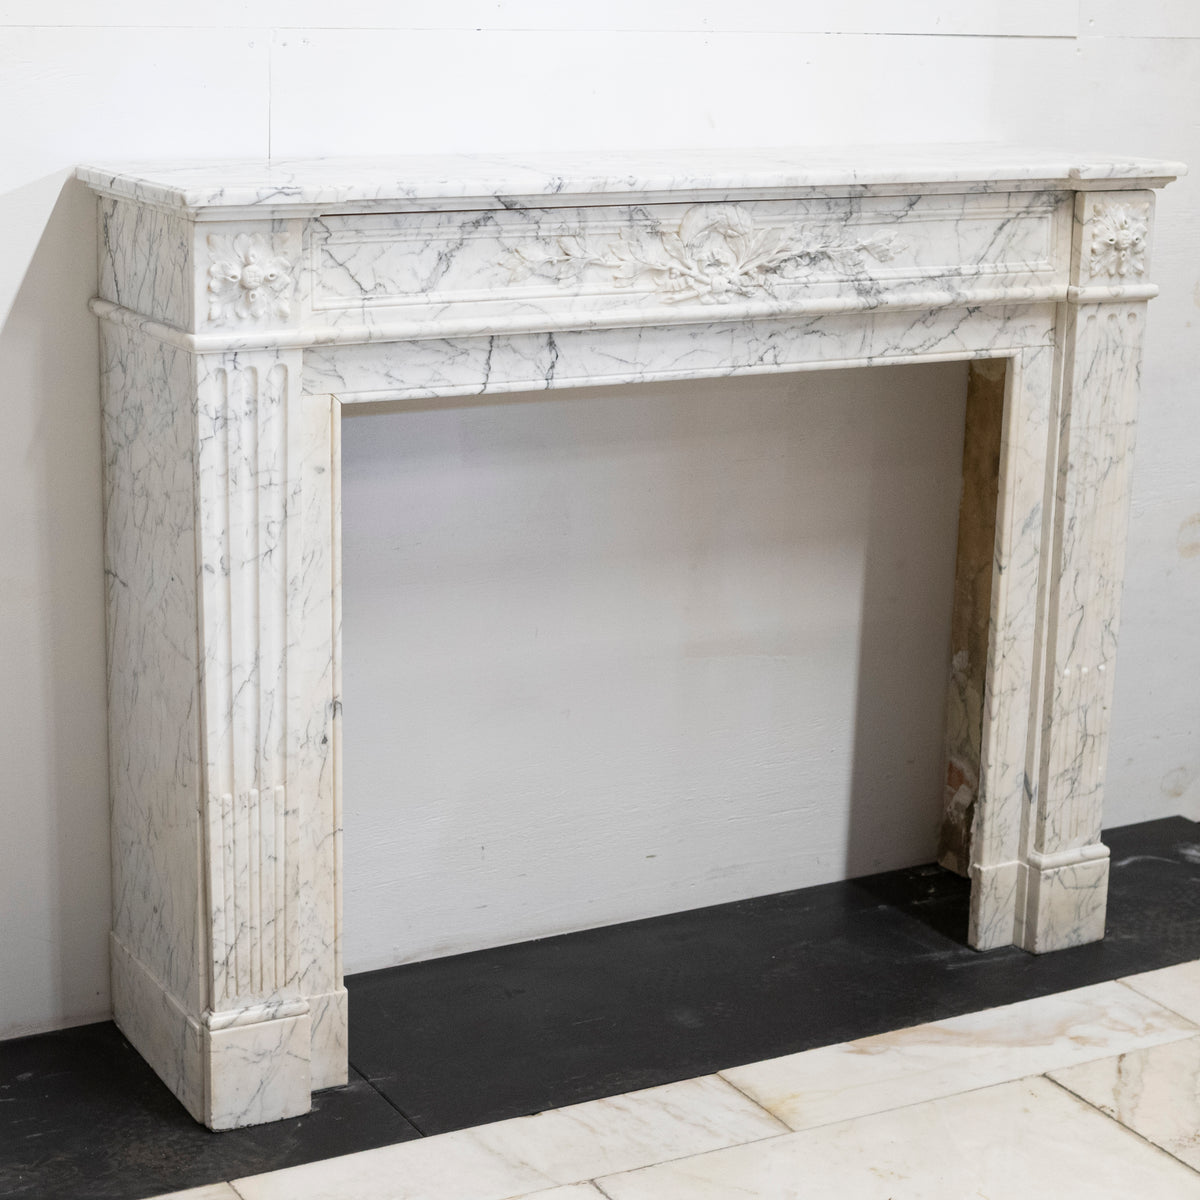 Antique Louis XVI Style Italian Marble Fireplace in Carrara Marble | The Architectural Forum